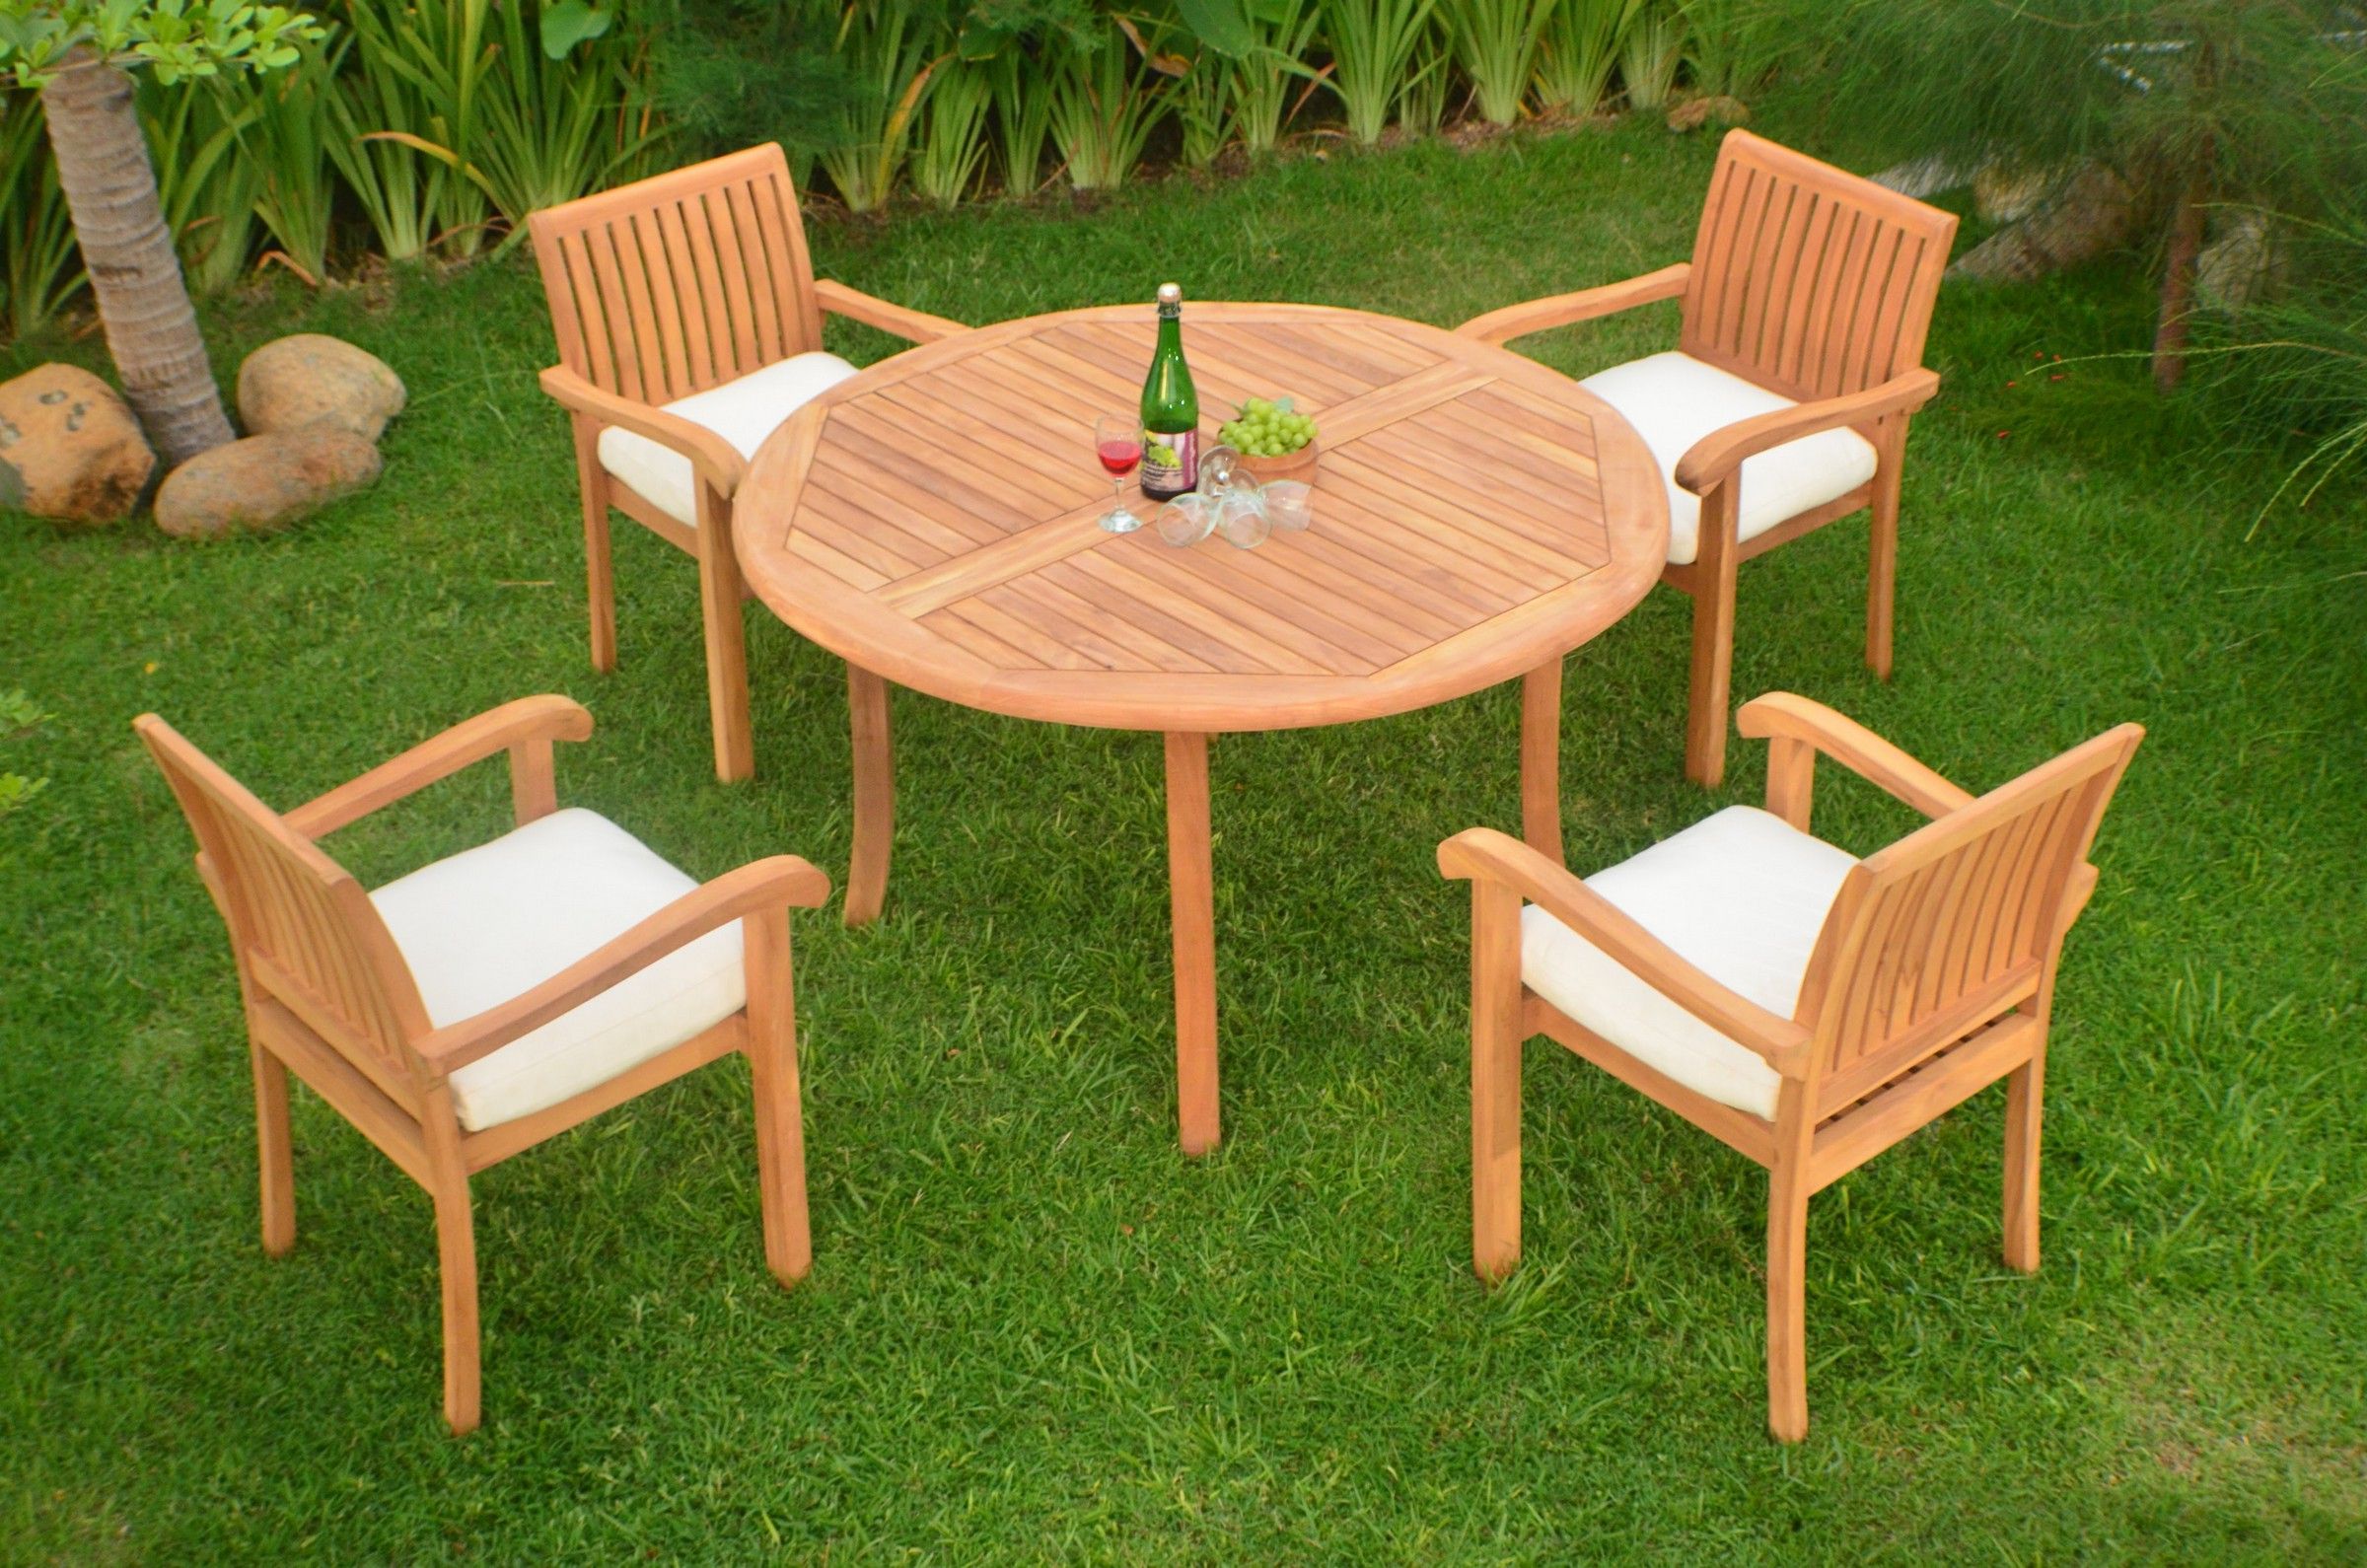 Widely Used Teak Dining Set:4 Seater 5 Pc – 52" Round Table And 4 Stacking Napa Arm Regarding Teak Wood Outdoor Table And Chairs Sets (View 1 of 15)